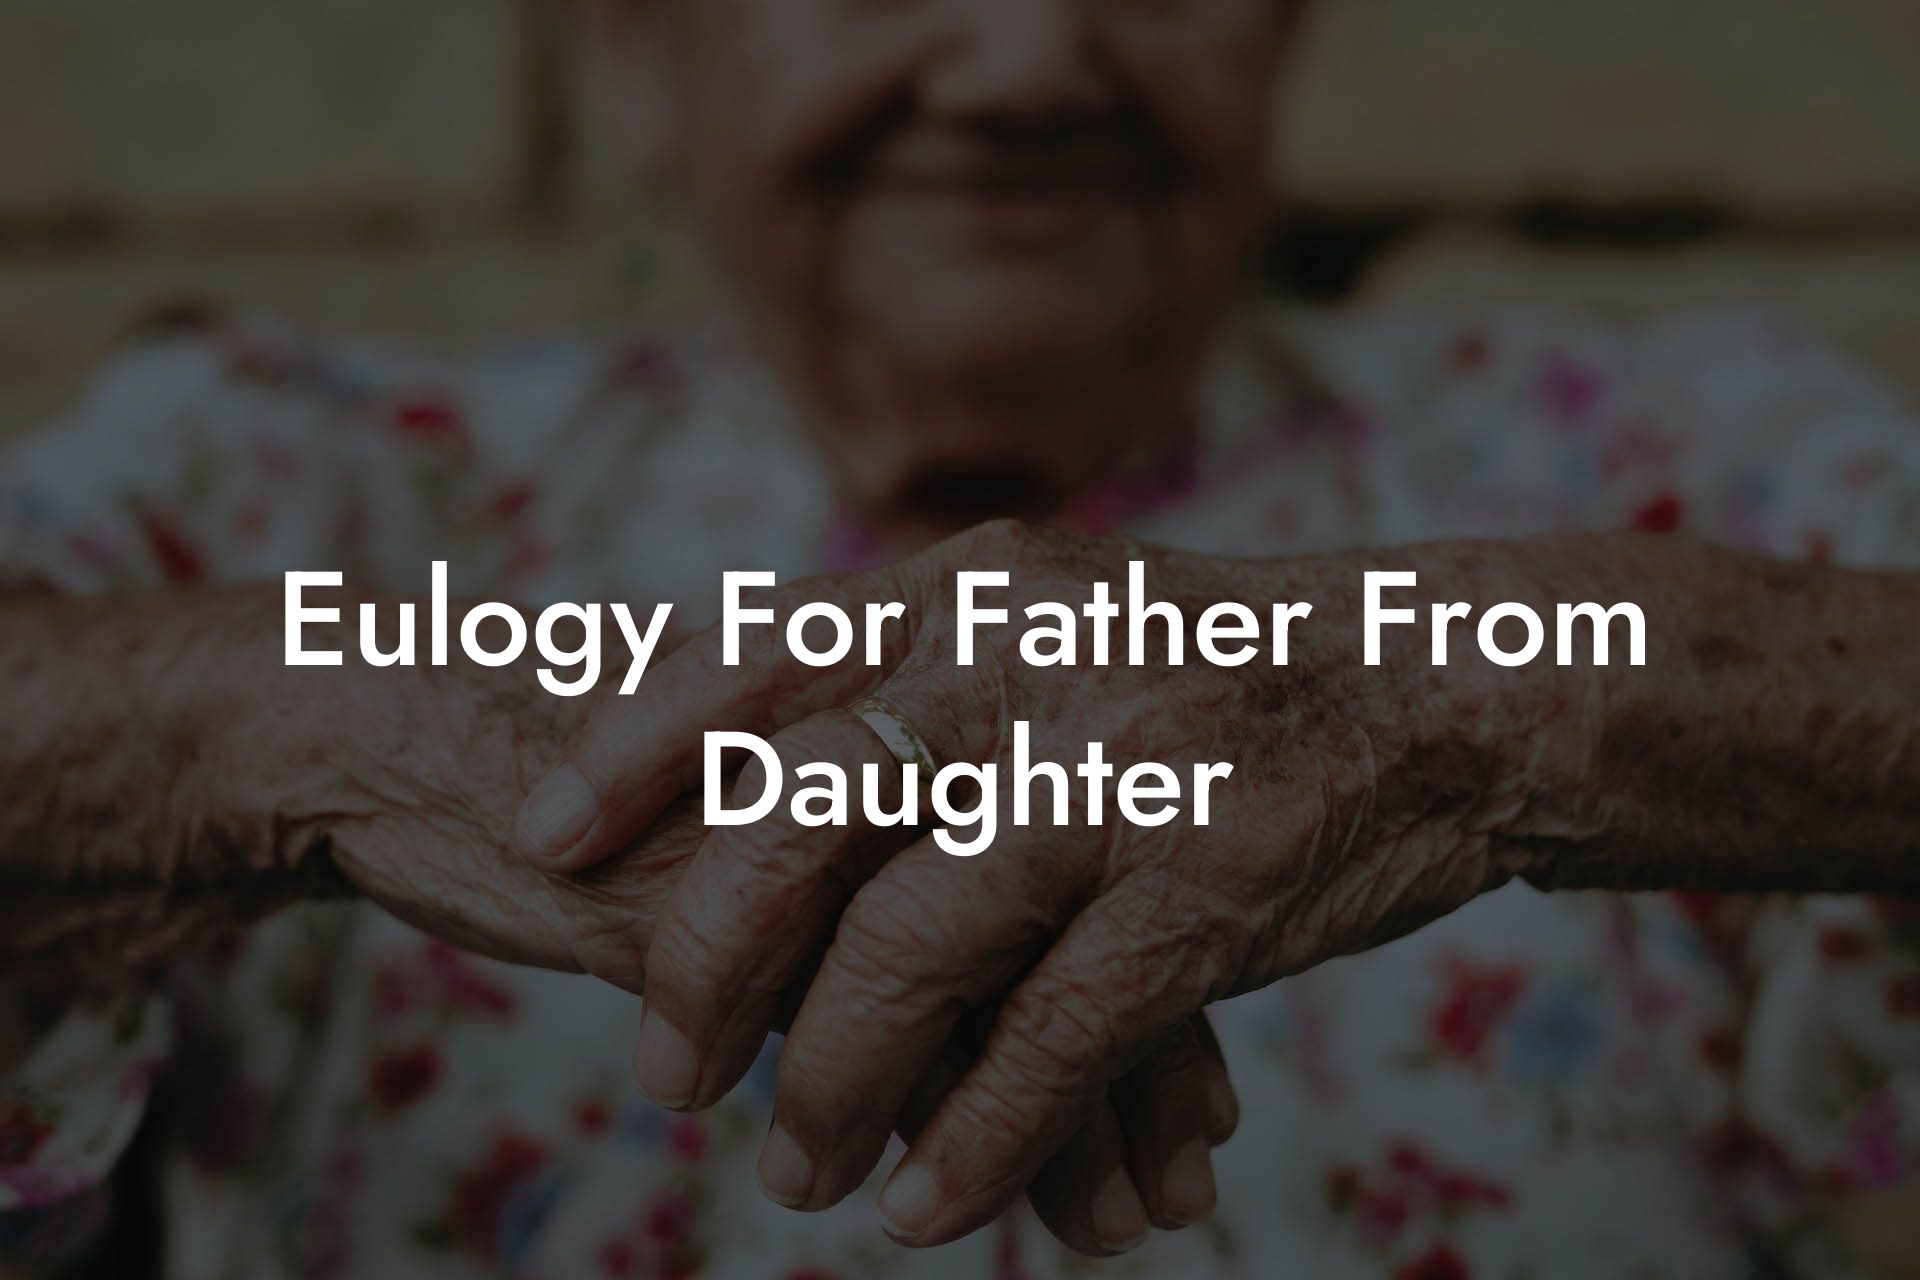 Eulogy For Father From Daughter